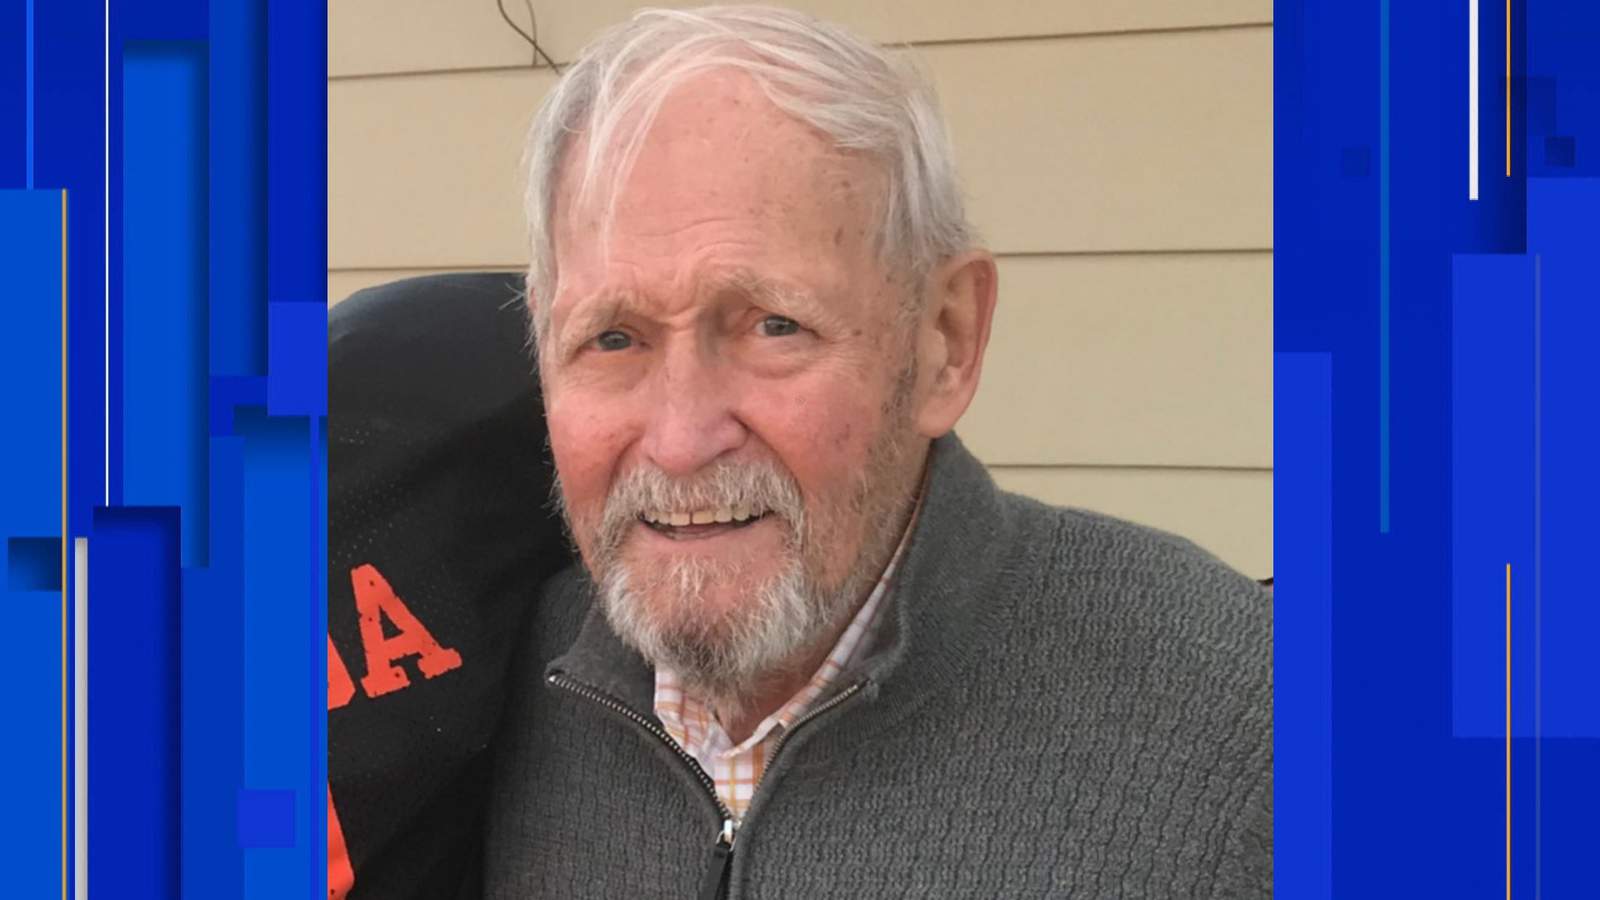 Police locate 84-year-old Shelby Township man